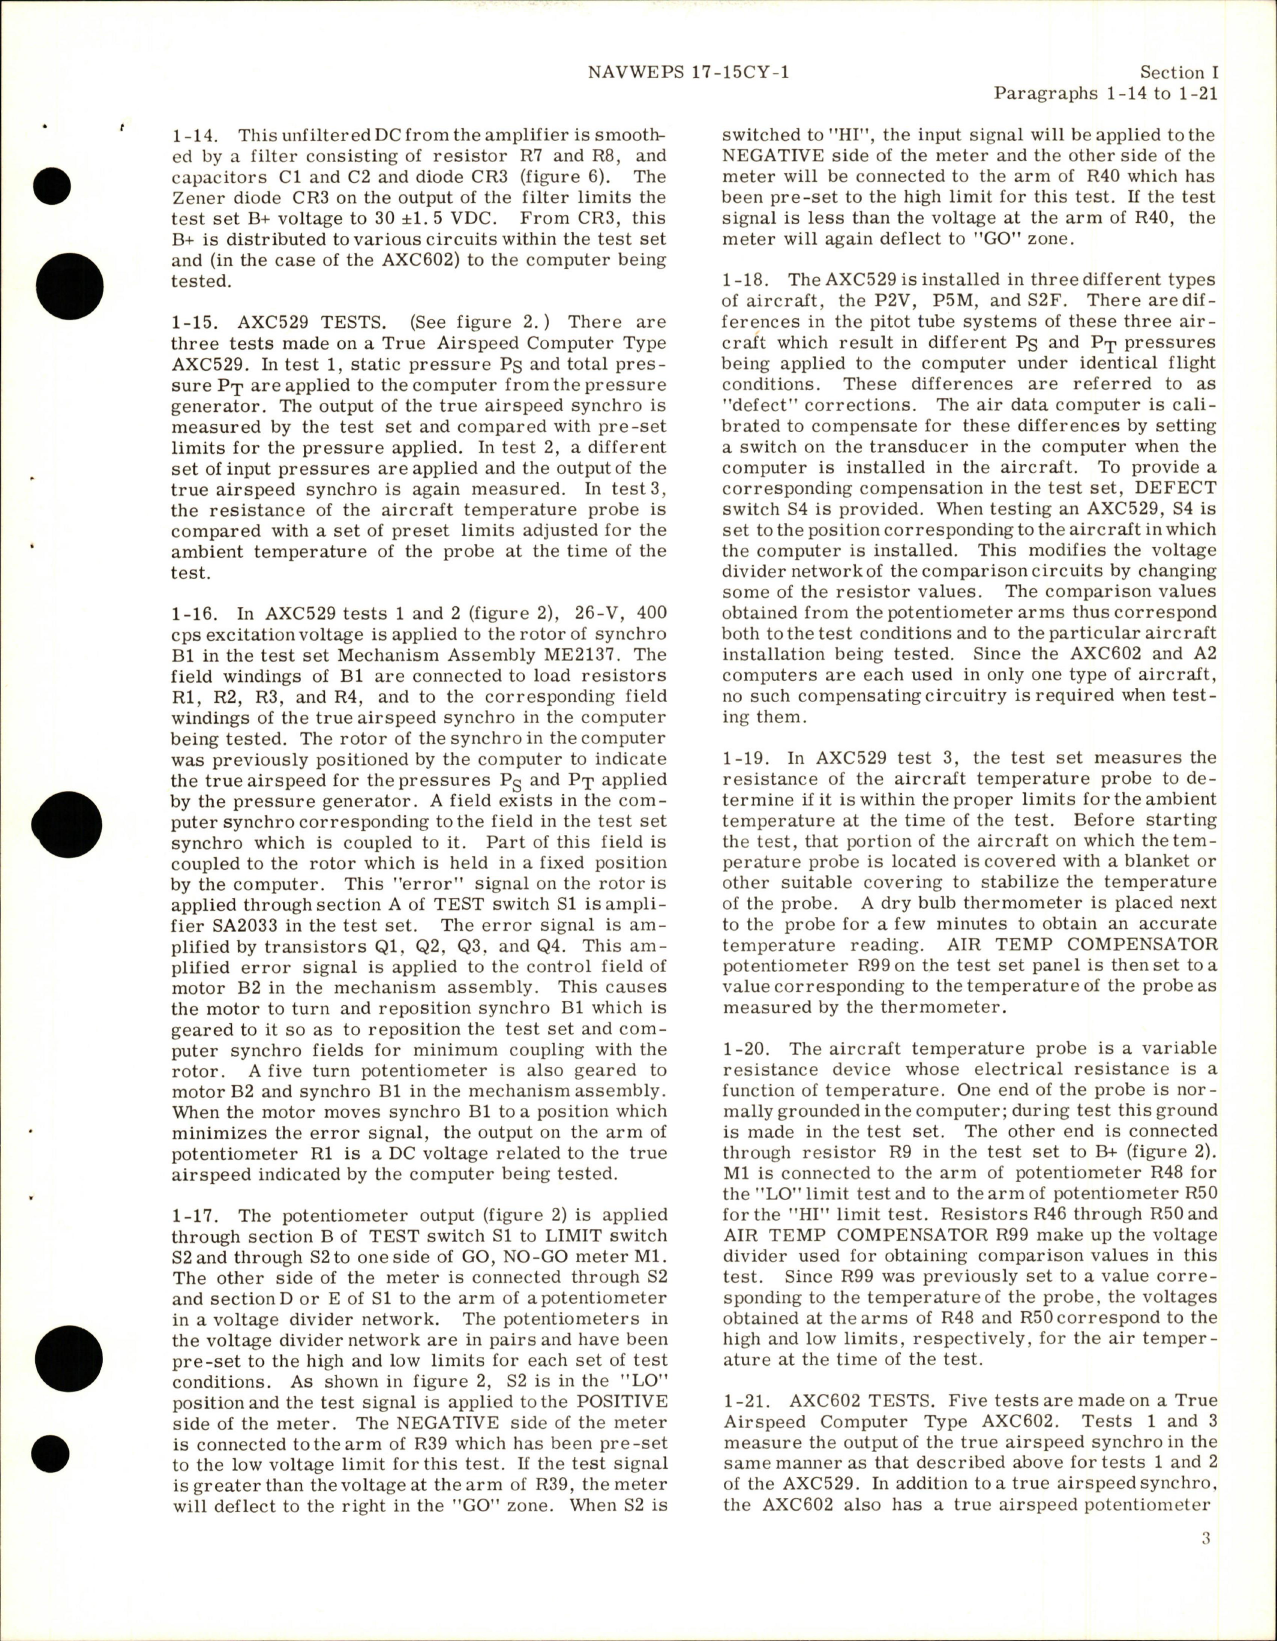 Sample page 7 from AirCorps Library document: Operation, Service Instructions and Illustrated Parts Breakdown for True Airspeed Computer Test Set - Type WS2061 - Part 817306